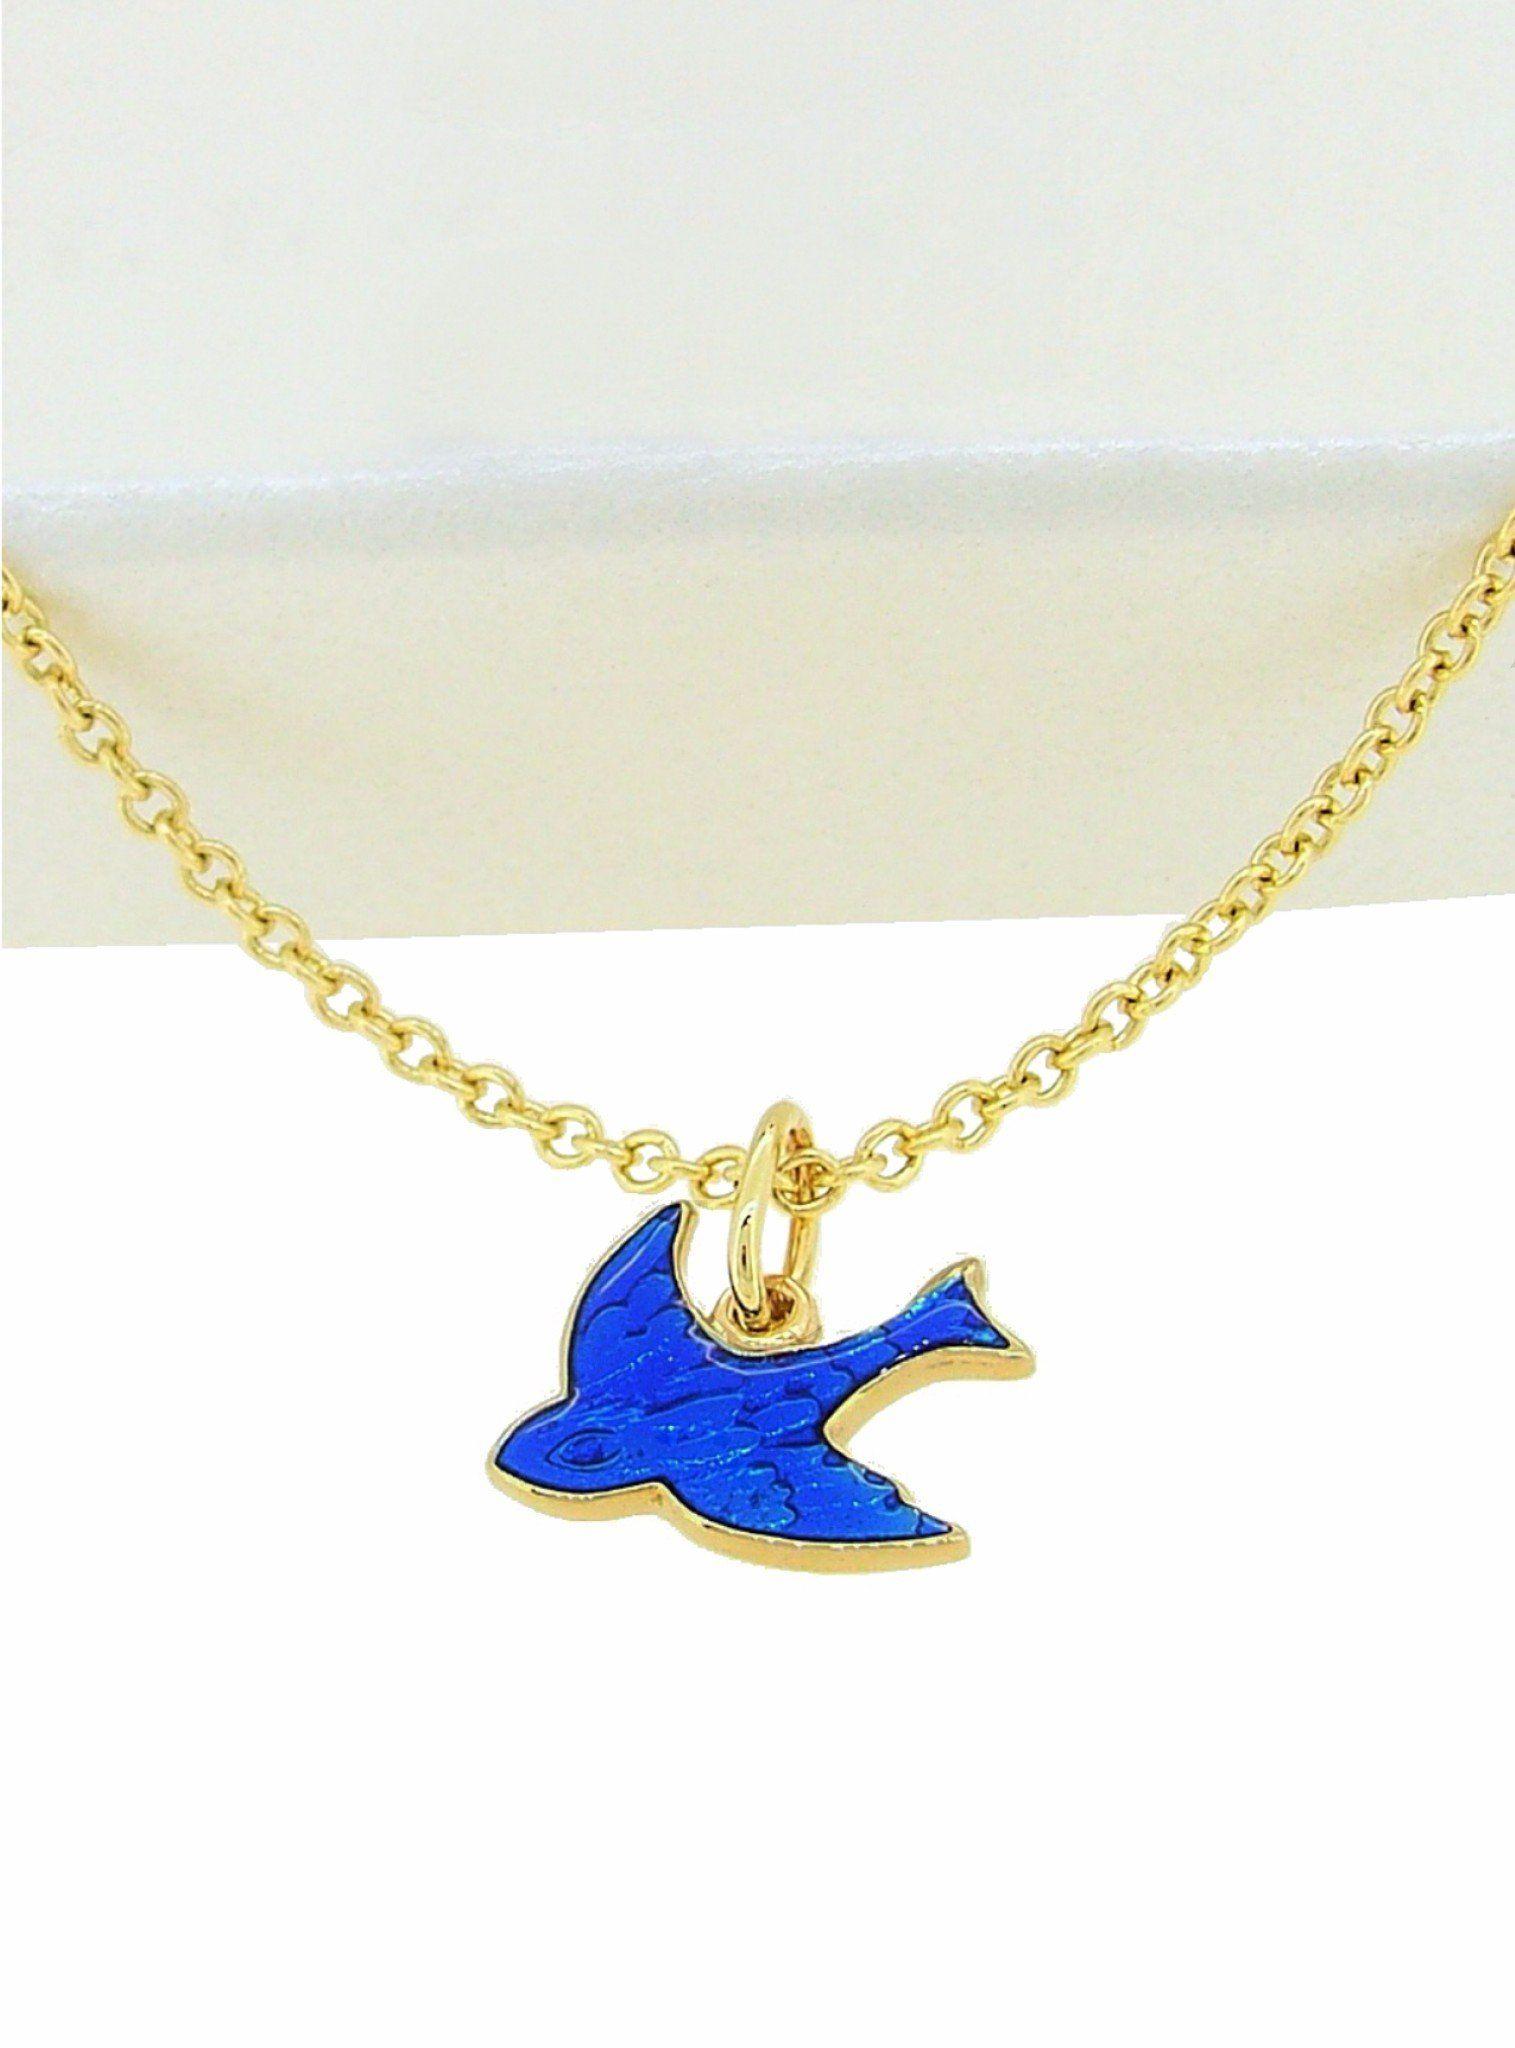 Gold and Blue Bird Logo - Bluebird of Happiness Love Heart Charm Necklace and Earrings Set in ...